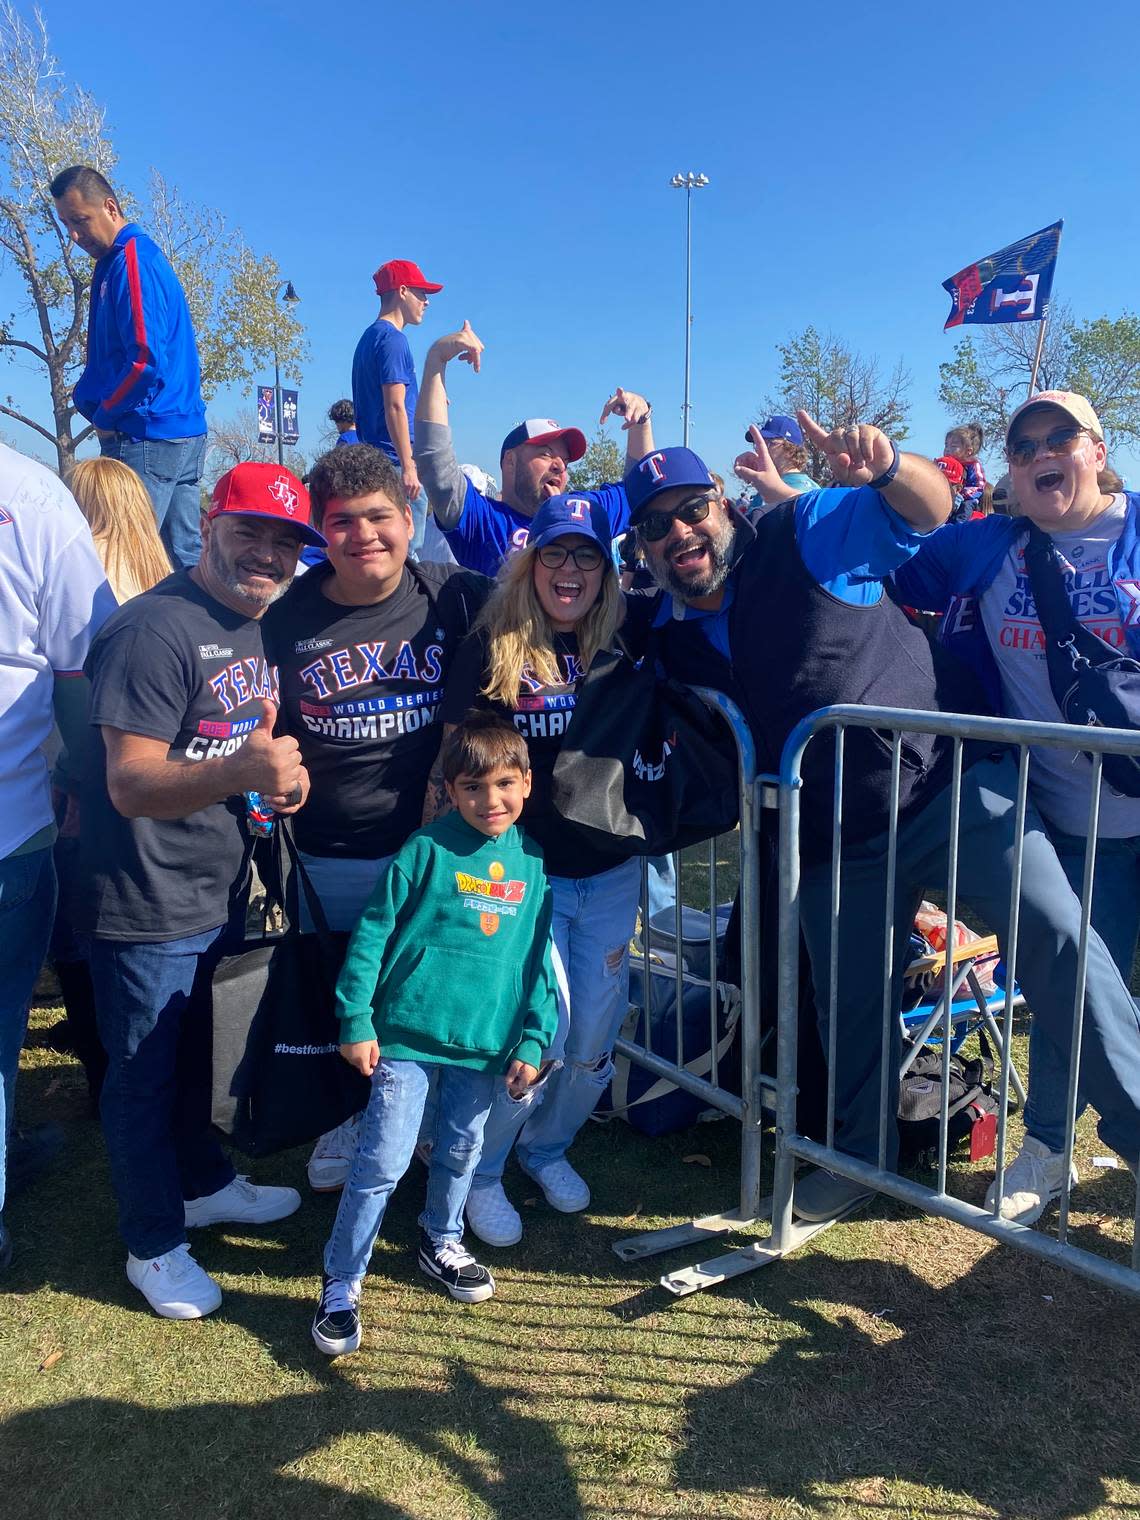 Life-long Rangers fan Kamal Heikal, second from the right, poses with fellow fans. Jenny Rudolph